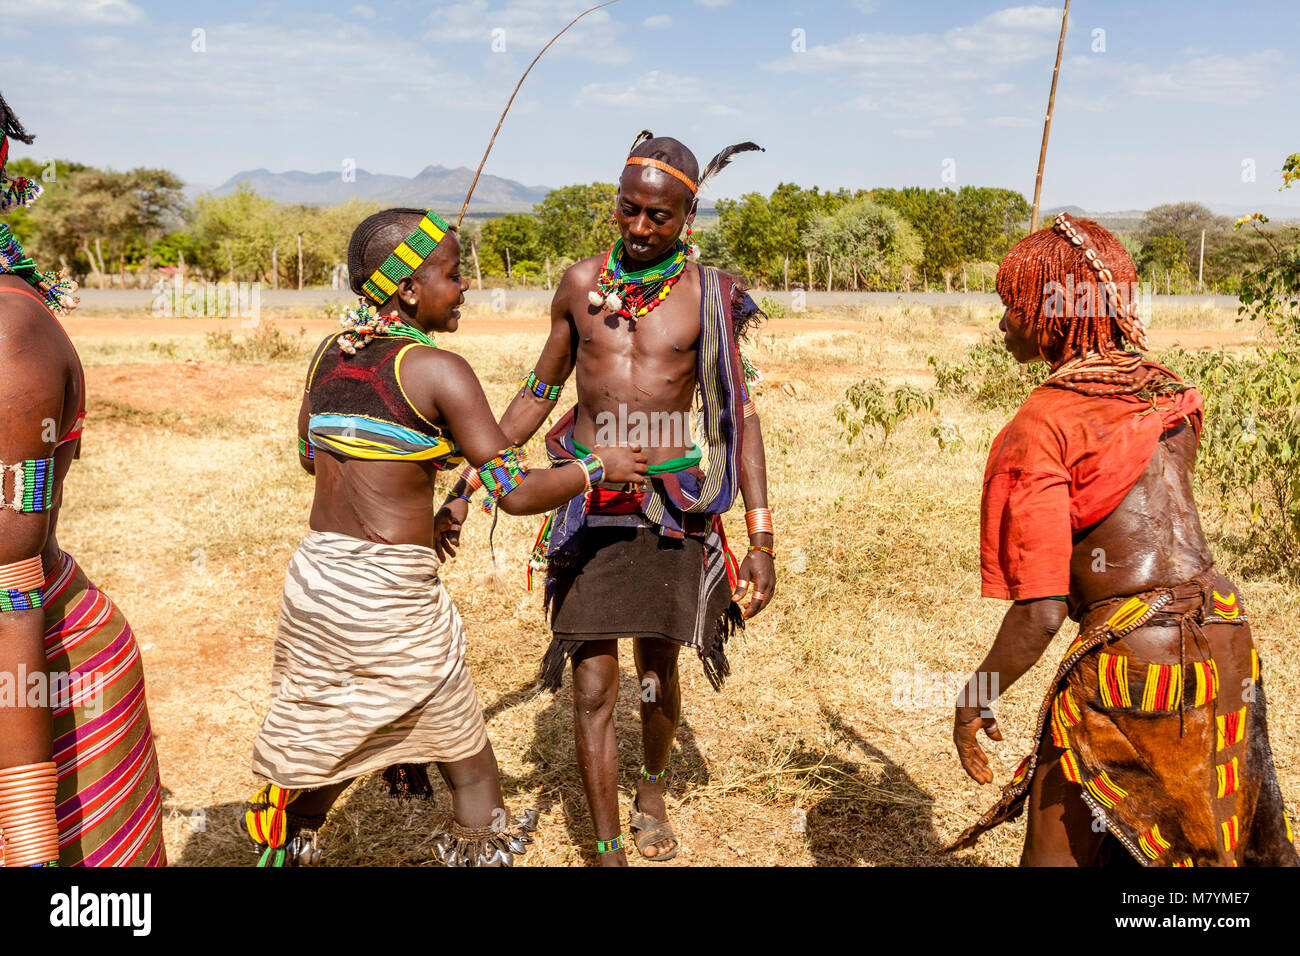 A Hamar Tribesman Whipping Young Hamar Women. The Young Women Ask